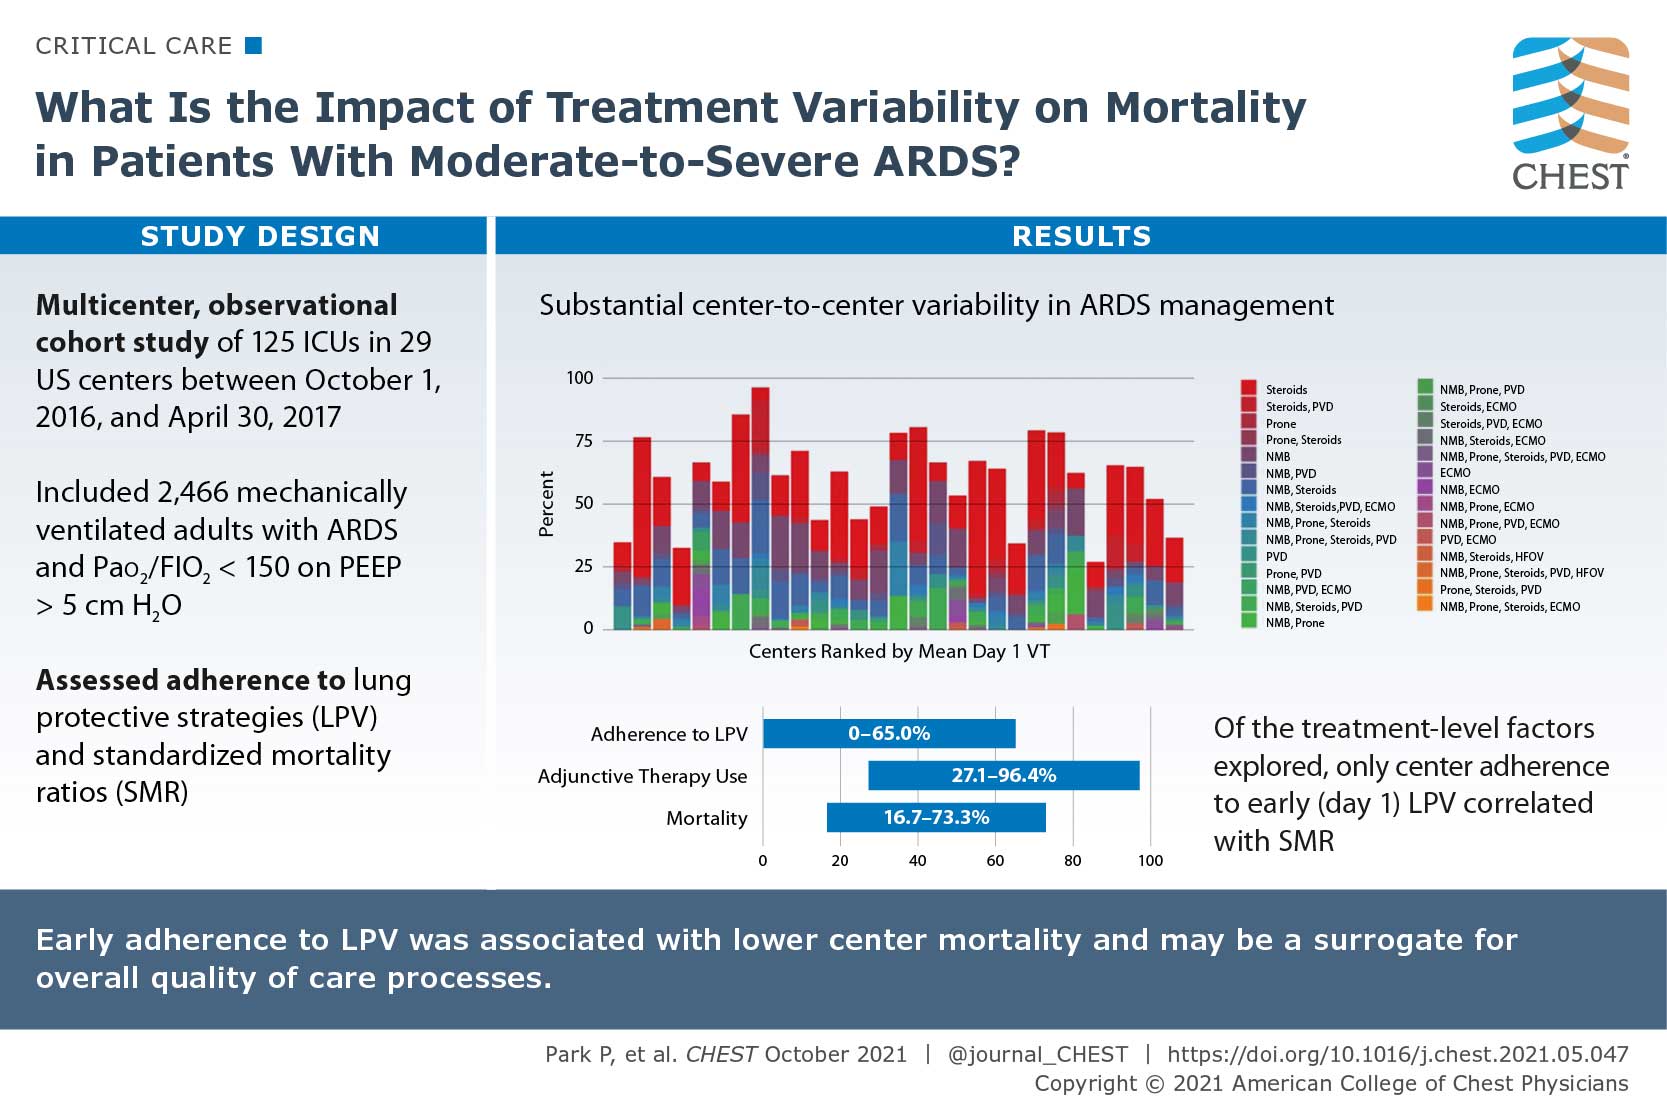 What is the impact of treatment variability on mortality in patients with moderate-to-severe ARDS?